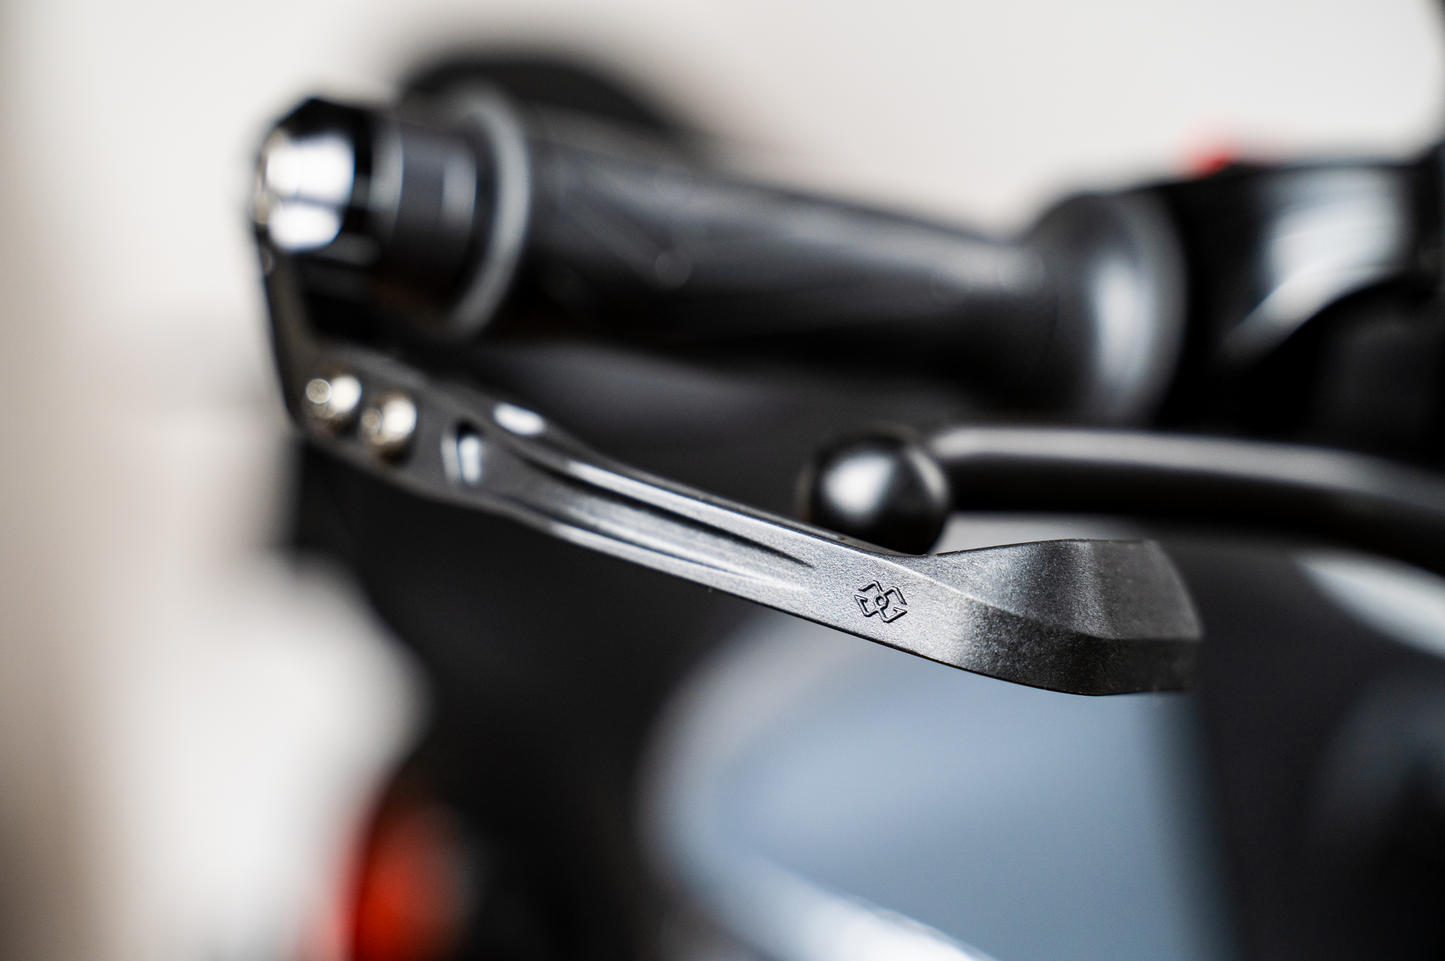 GT Clutch Lever Guard - Averys Motorcycles